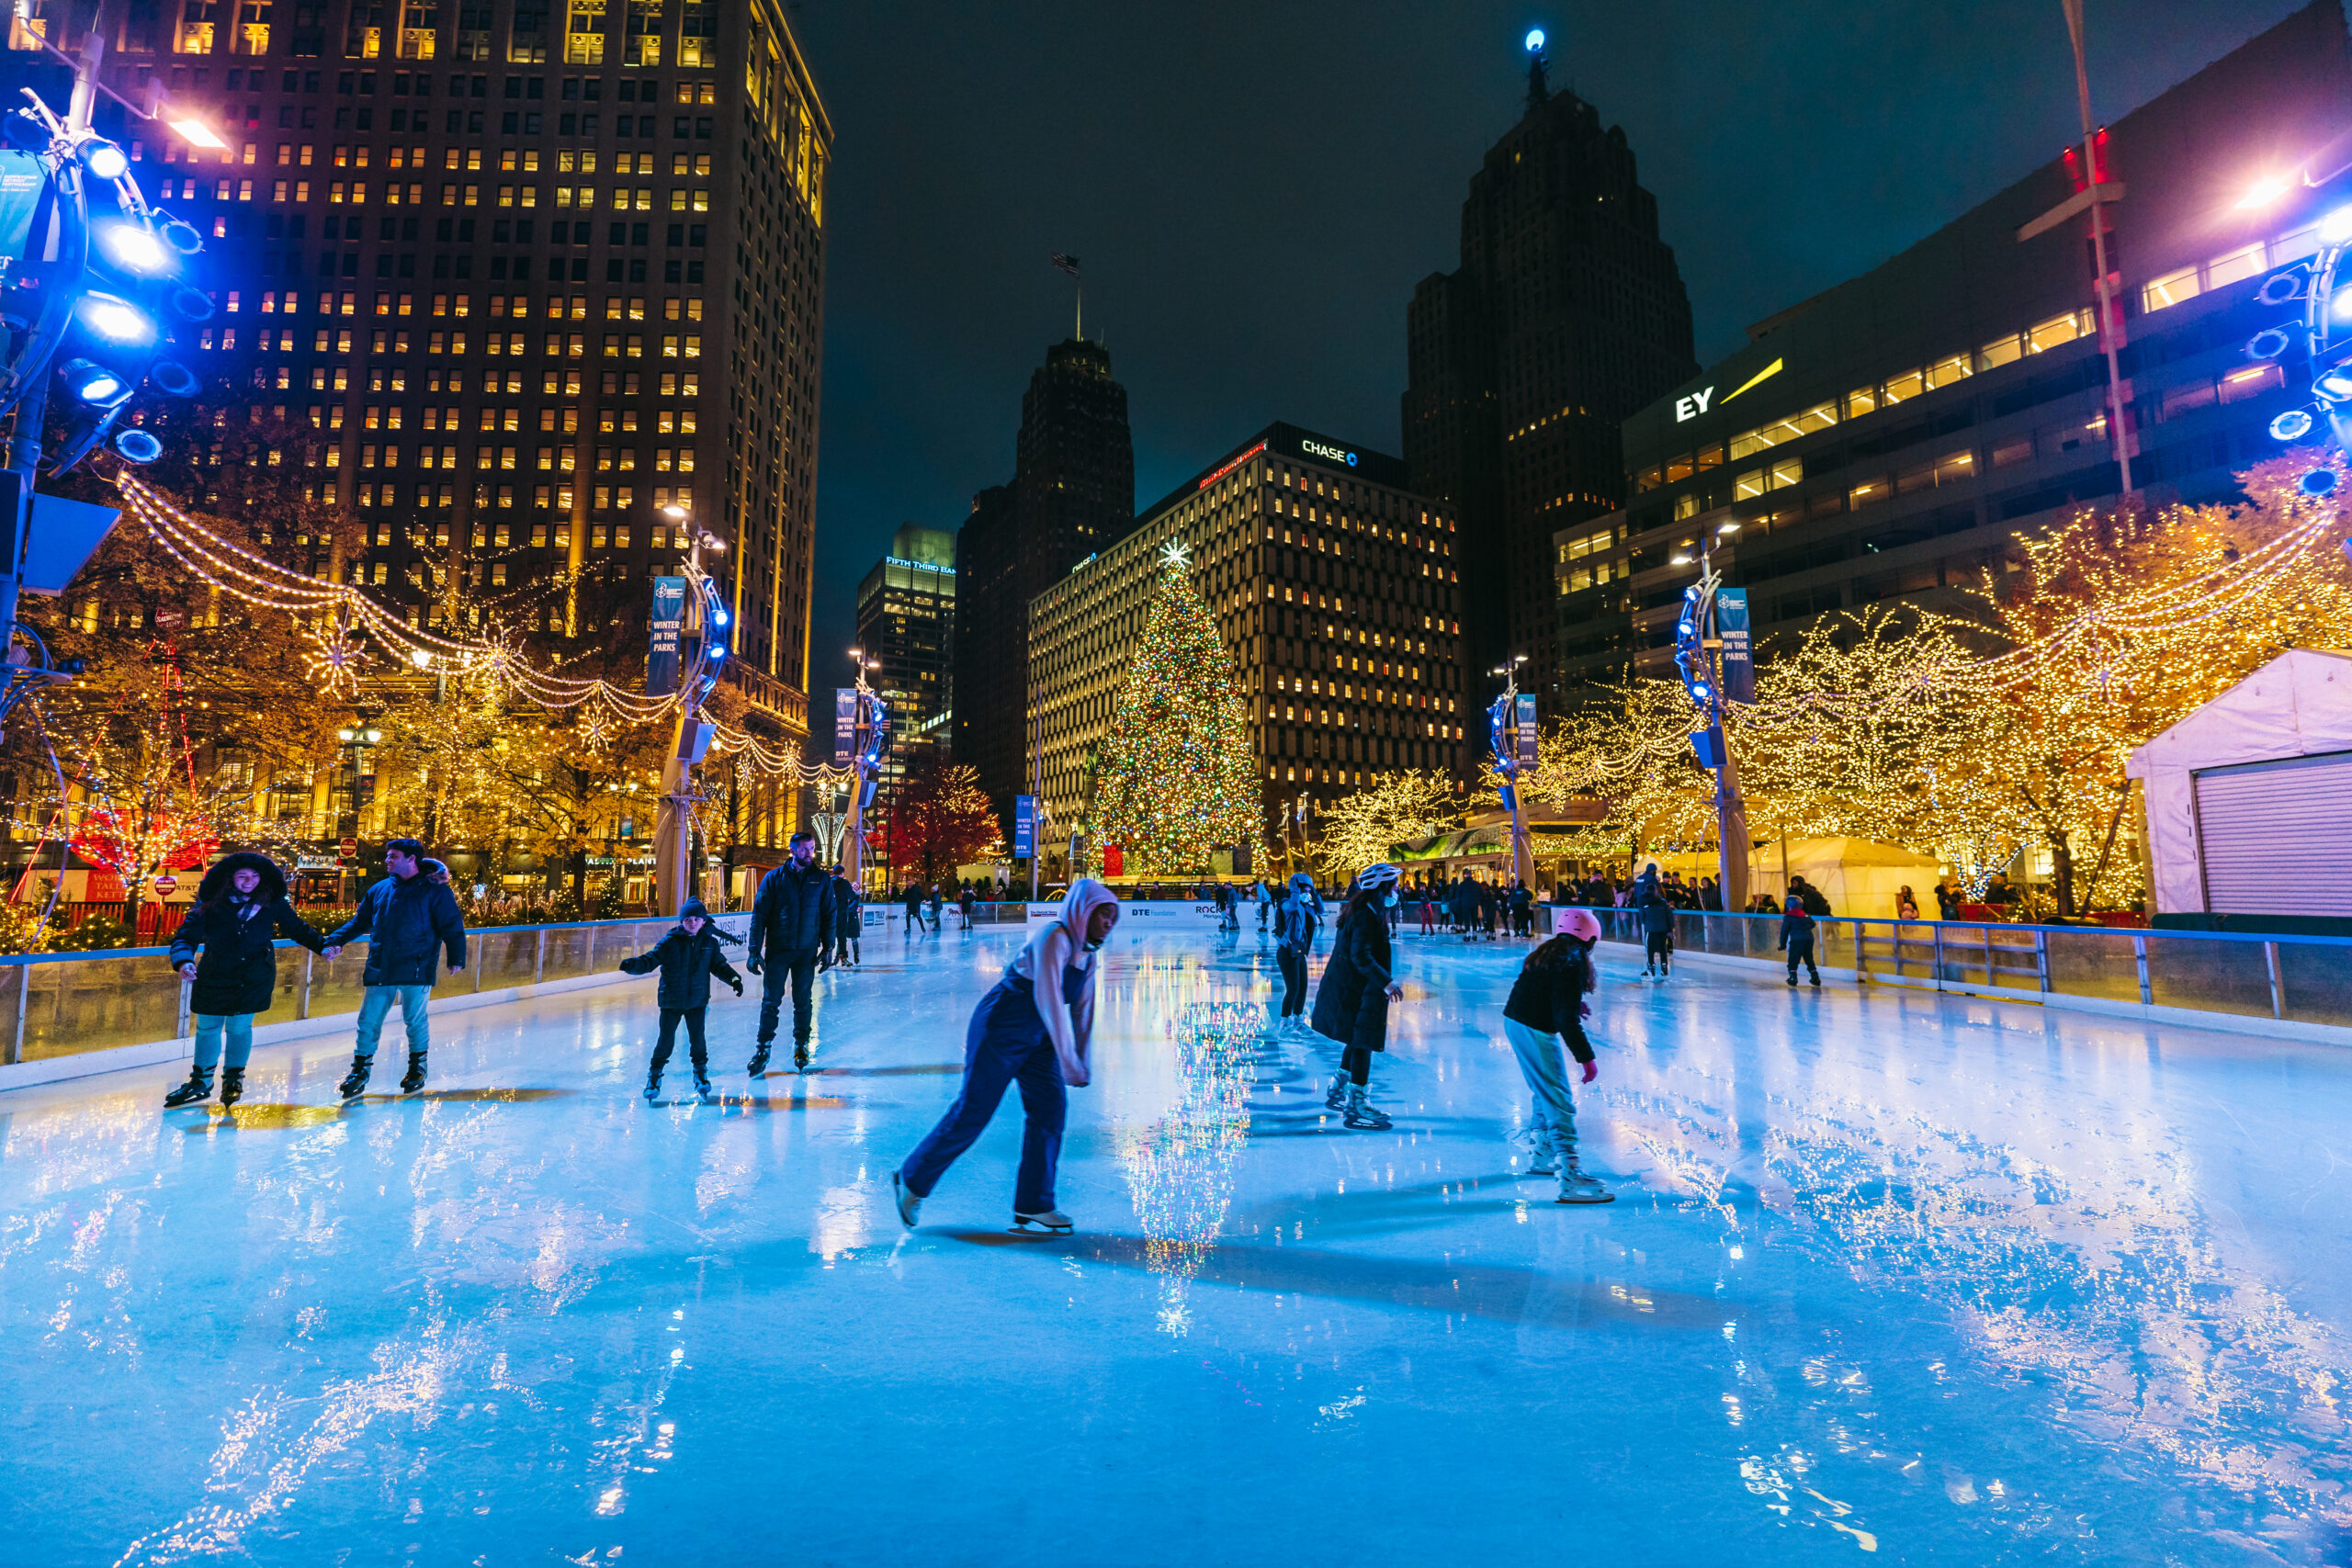 Ice skating at Campus Martius in downtown Detroit